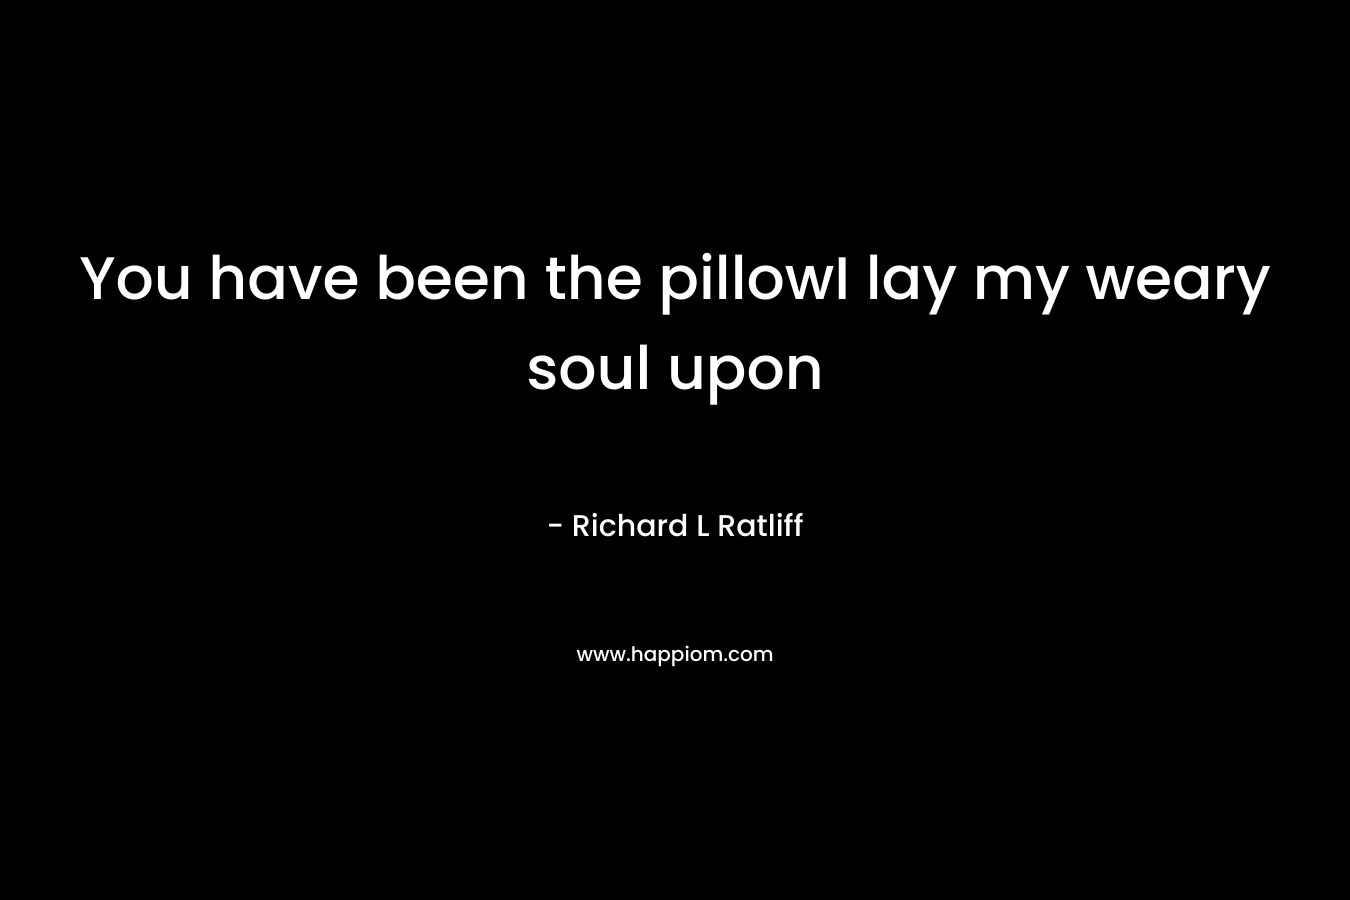 You have been the pillowI lay my weary soul upon